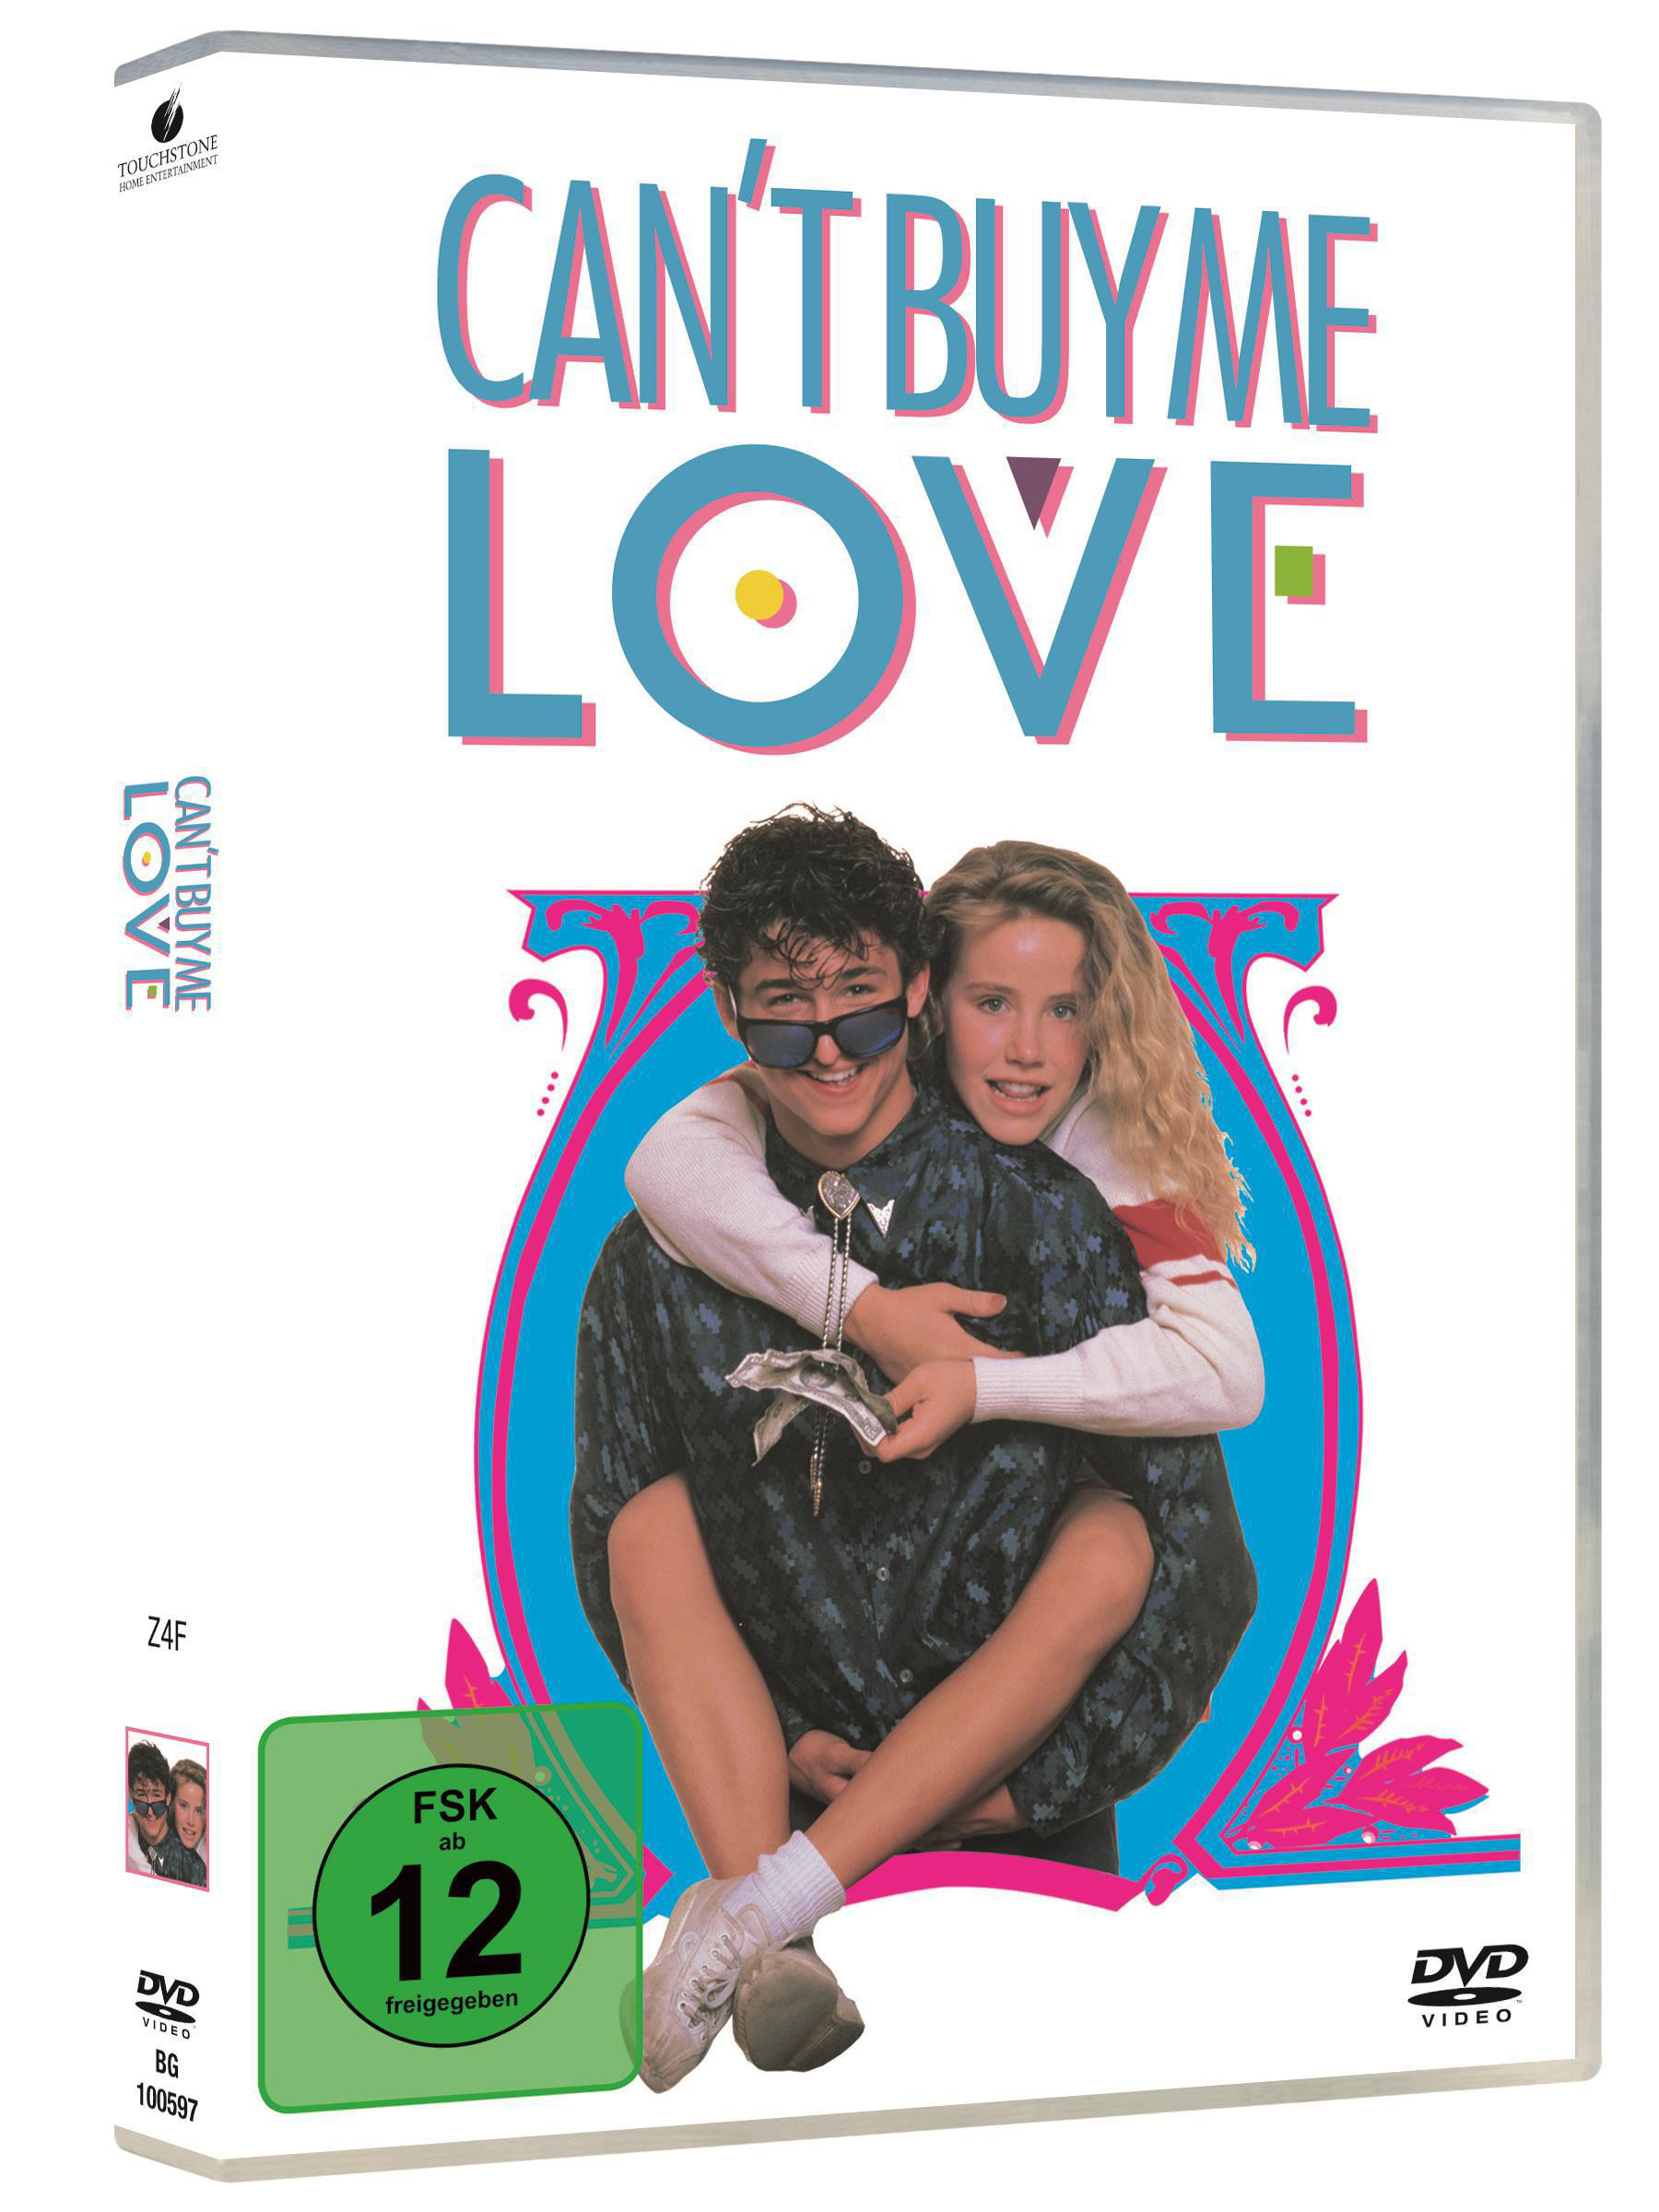 Can\'t Me Buy DVD Love